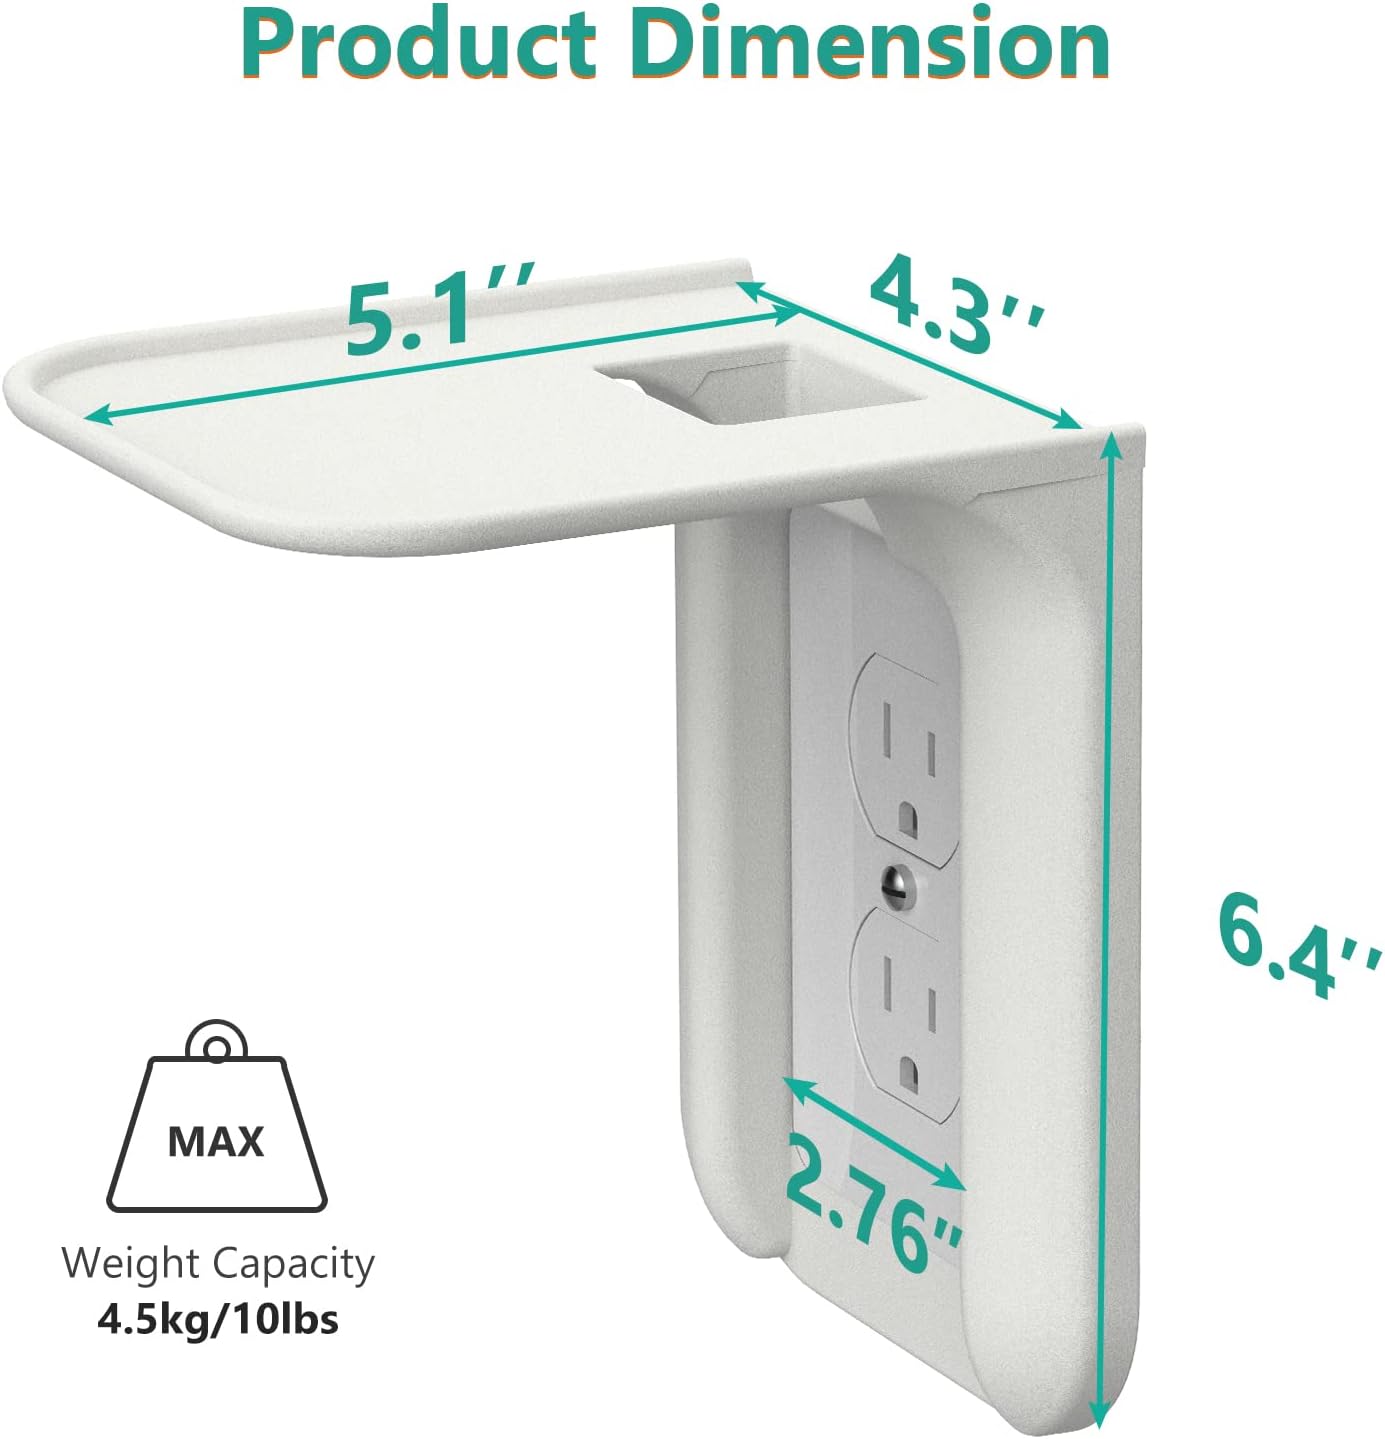 WALI Outlet Shelf Wall Holder,Bathroom Wall Shelf up to 10lbs Standard Vertical Duplex Wall Shelf Organizer for Smart Home Decor Space Saving Power Tools, Toothbrush (OLS001-W), 1 Pack, White